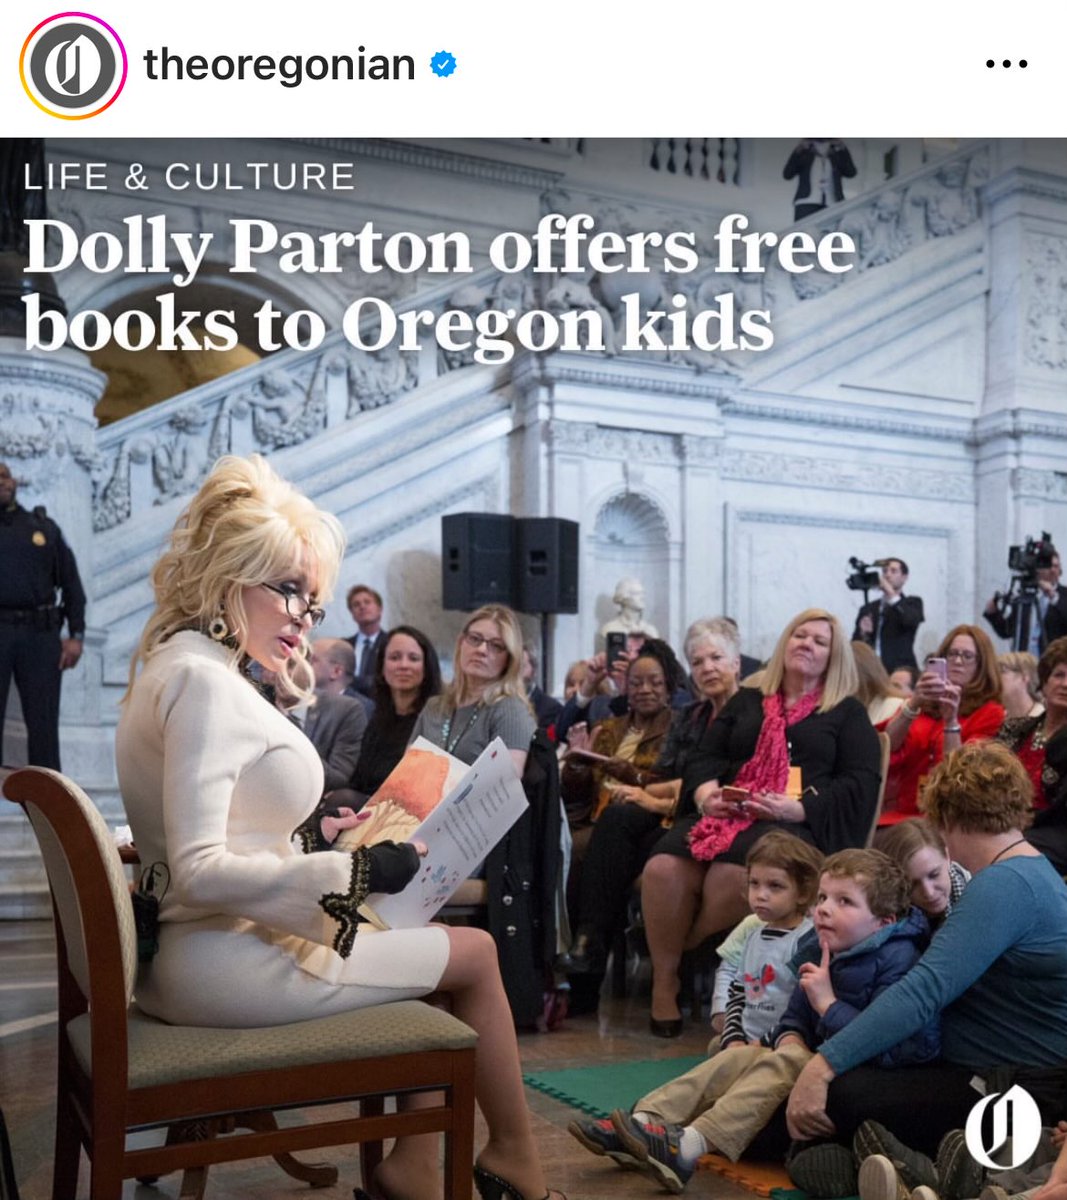 Kids in Oregon can get a free book every month from birth until age 5 thanks to our Shero @DollyParton’s Dollywood Foundation ❤️ #RaiseAReader